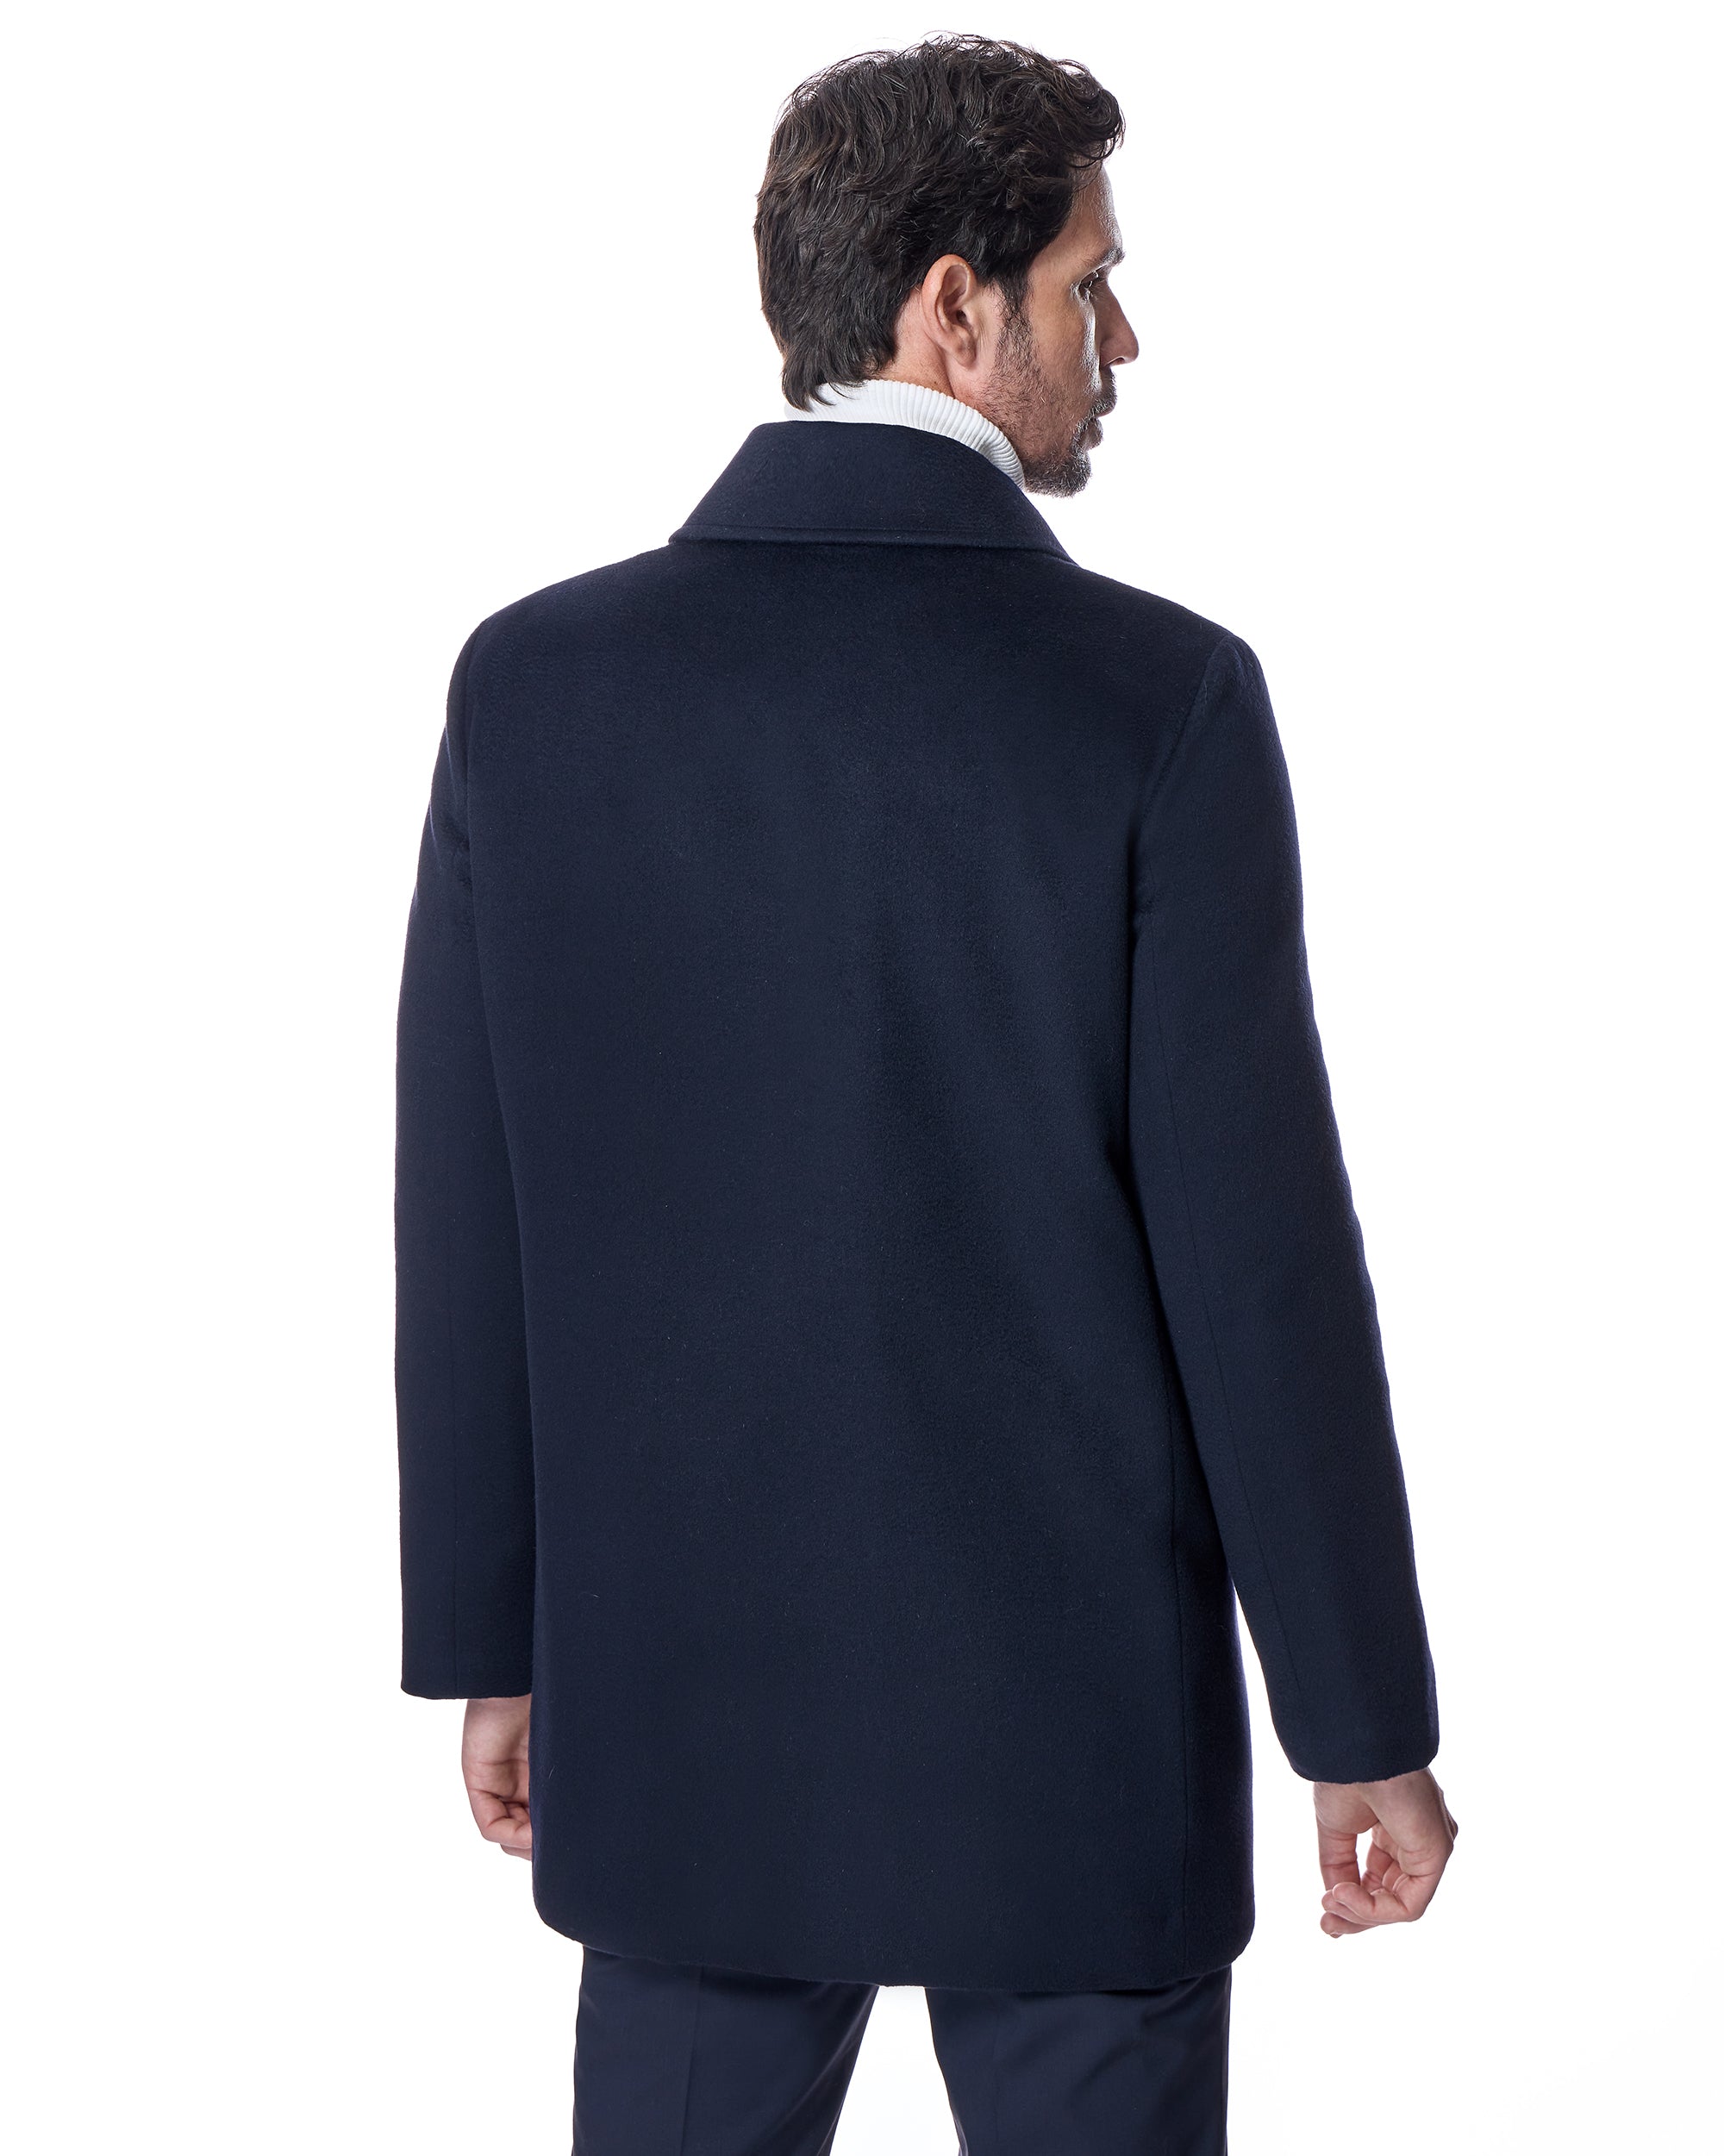 Men's Wool Quilted Lined Peacoat